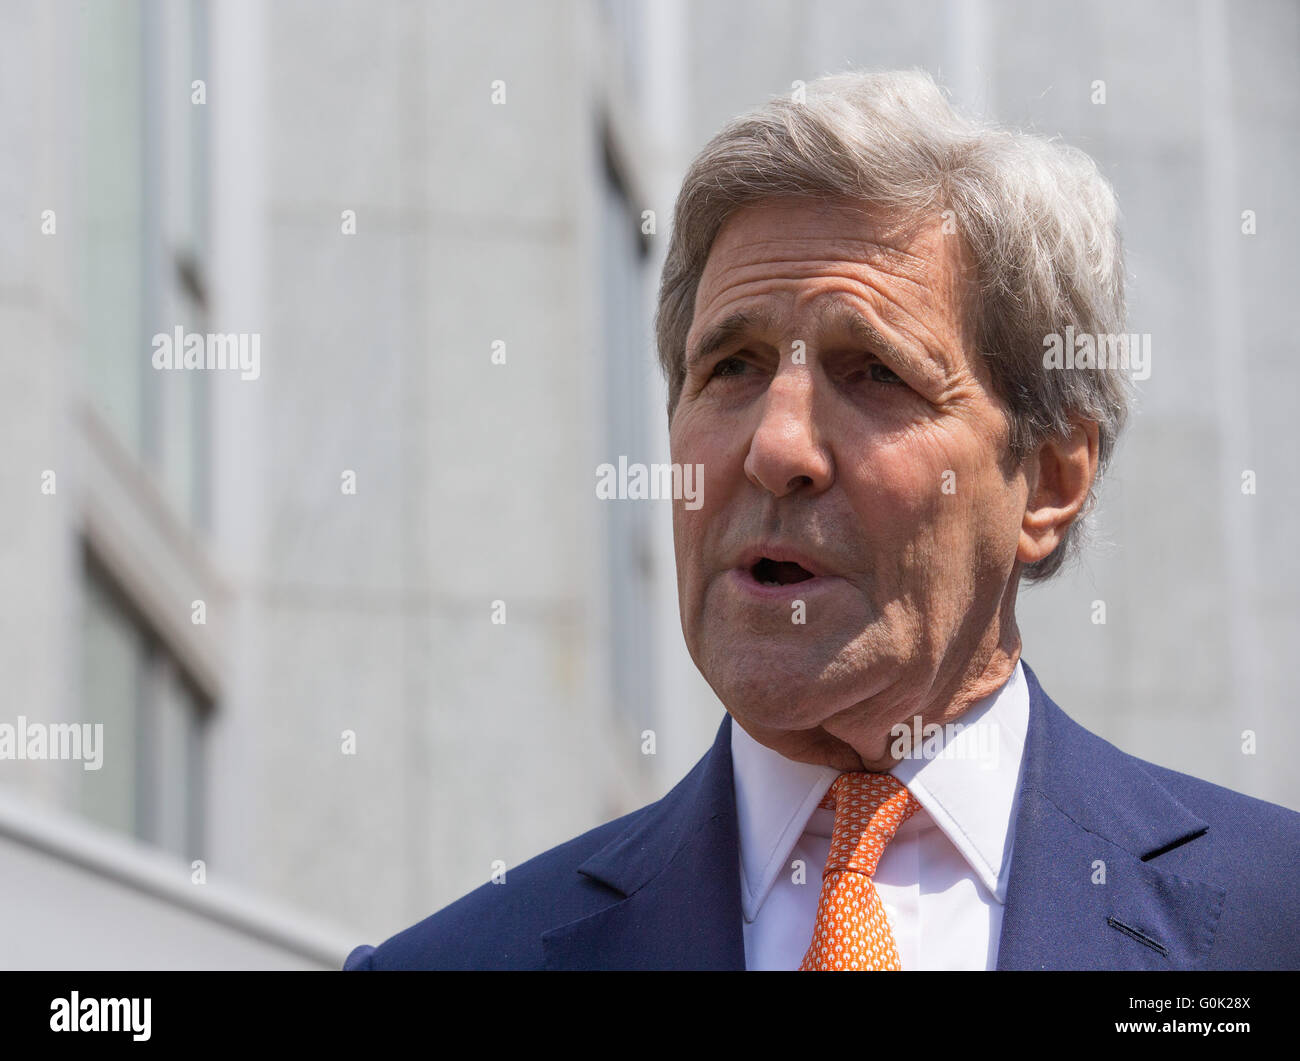 Geneva, Switzerland. 2nd May, 2016. U.S. Secretary of State John Kerry speaks to the media after a meeting with UN Special Envoy for Syria Staffan de Mistura (not pictured) in a hotel in Geneva, Switzerland, May 2, 2016. U.S. Secretary of State John Kerry on Monday urged all parties to the Syrian conflict to end violence and restore the cessation of hostilities during his second day trip here for talks focusing on the Syrian situation. Credit:  Xu Jinquan/Xinhua/Alamy Live News Stock Photo